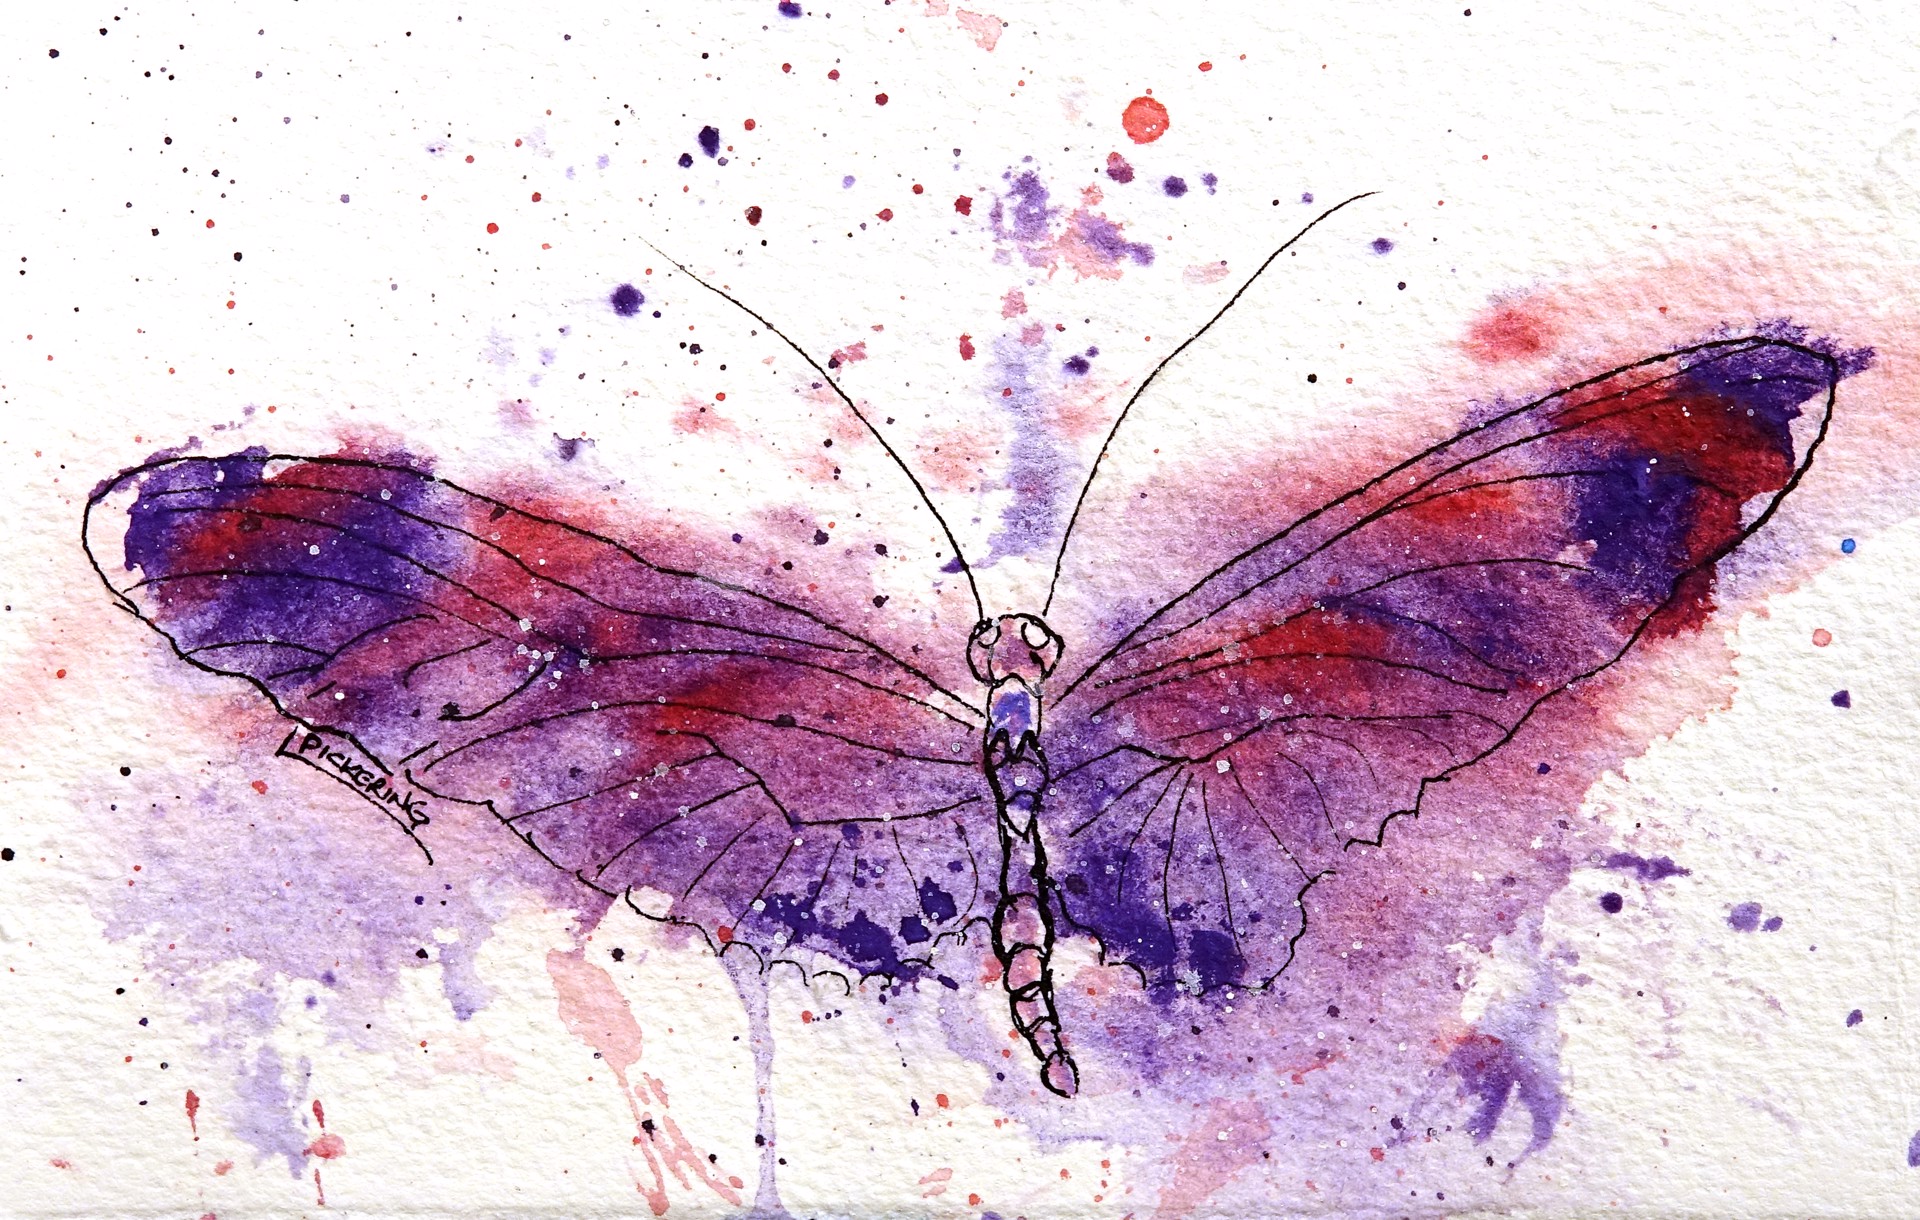 Purple Dragonfly by Laura Pickering